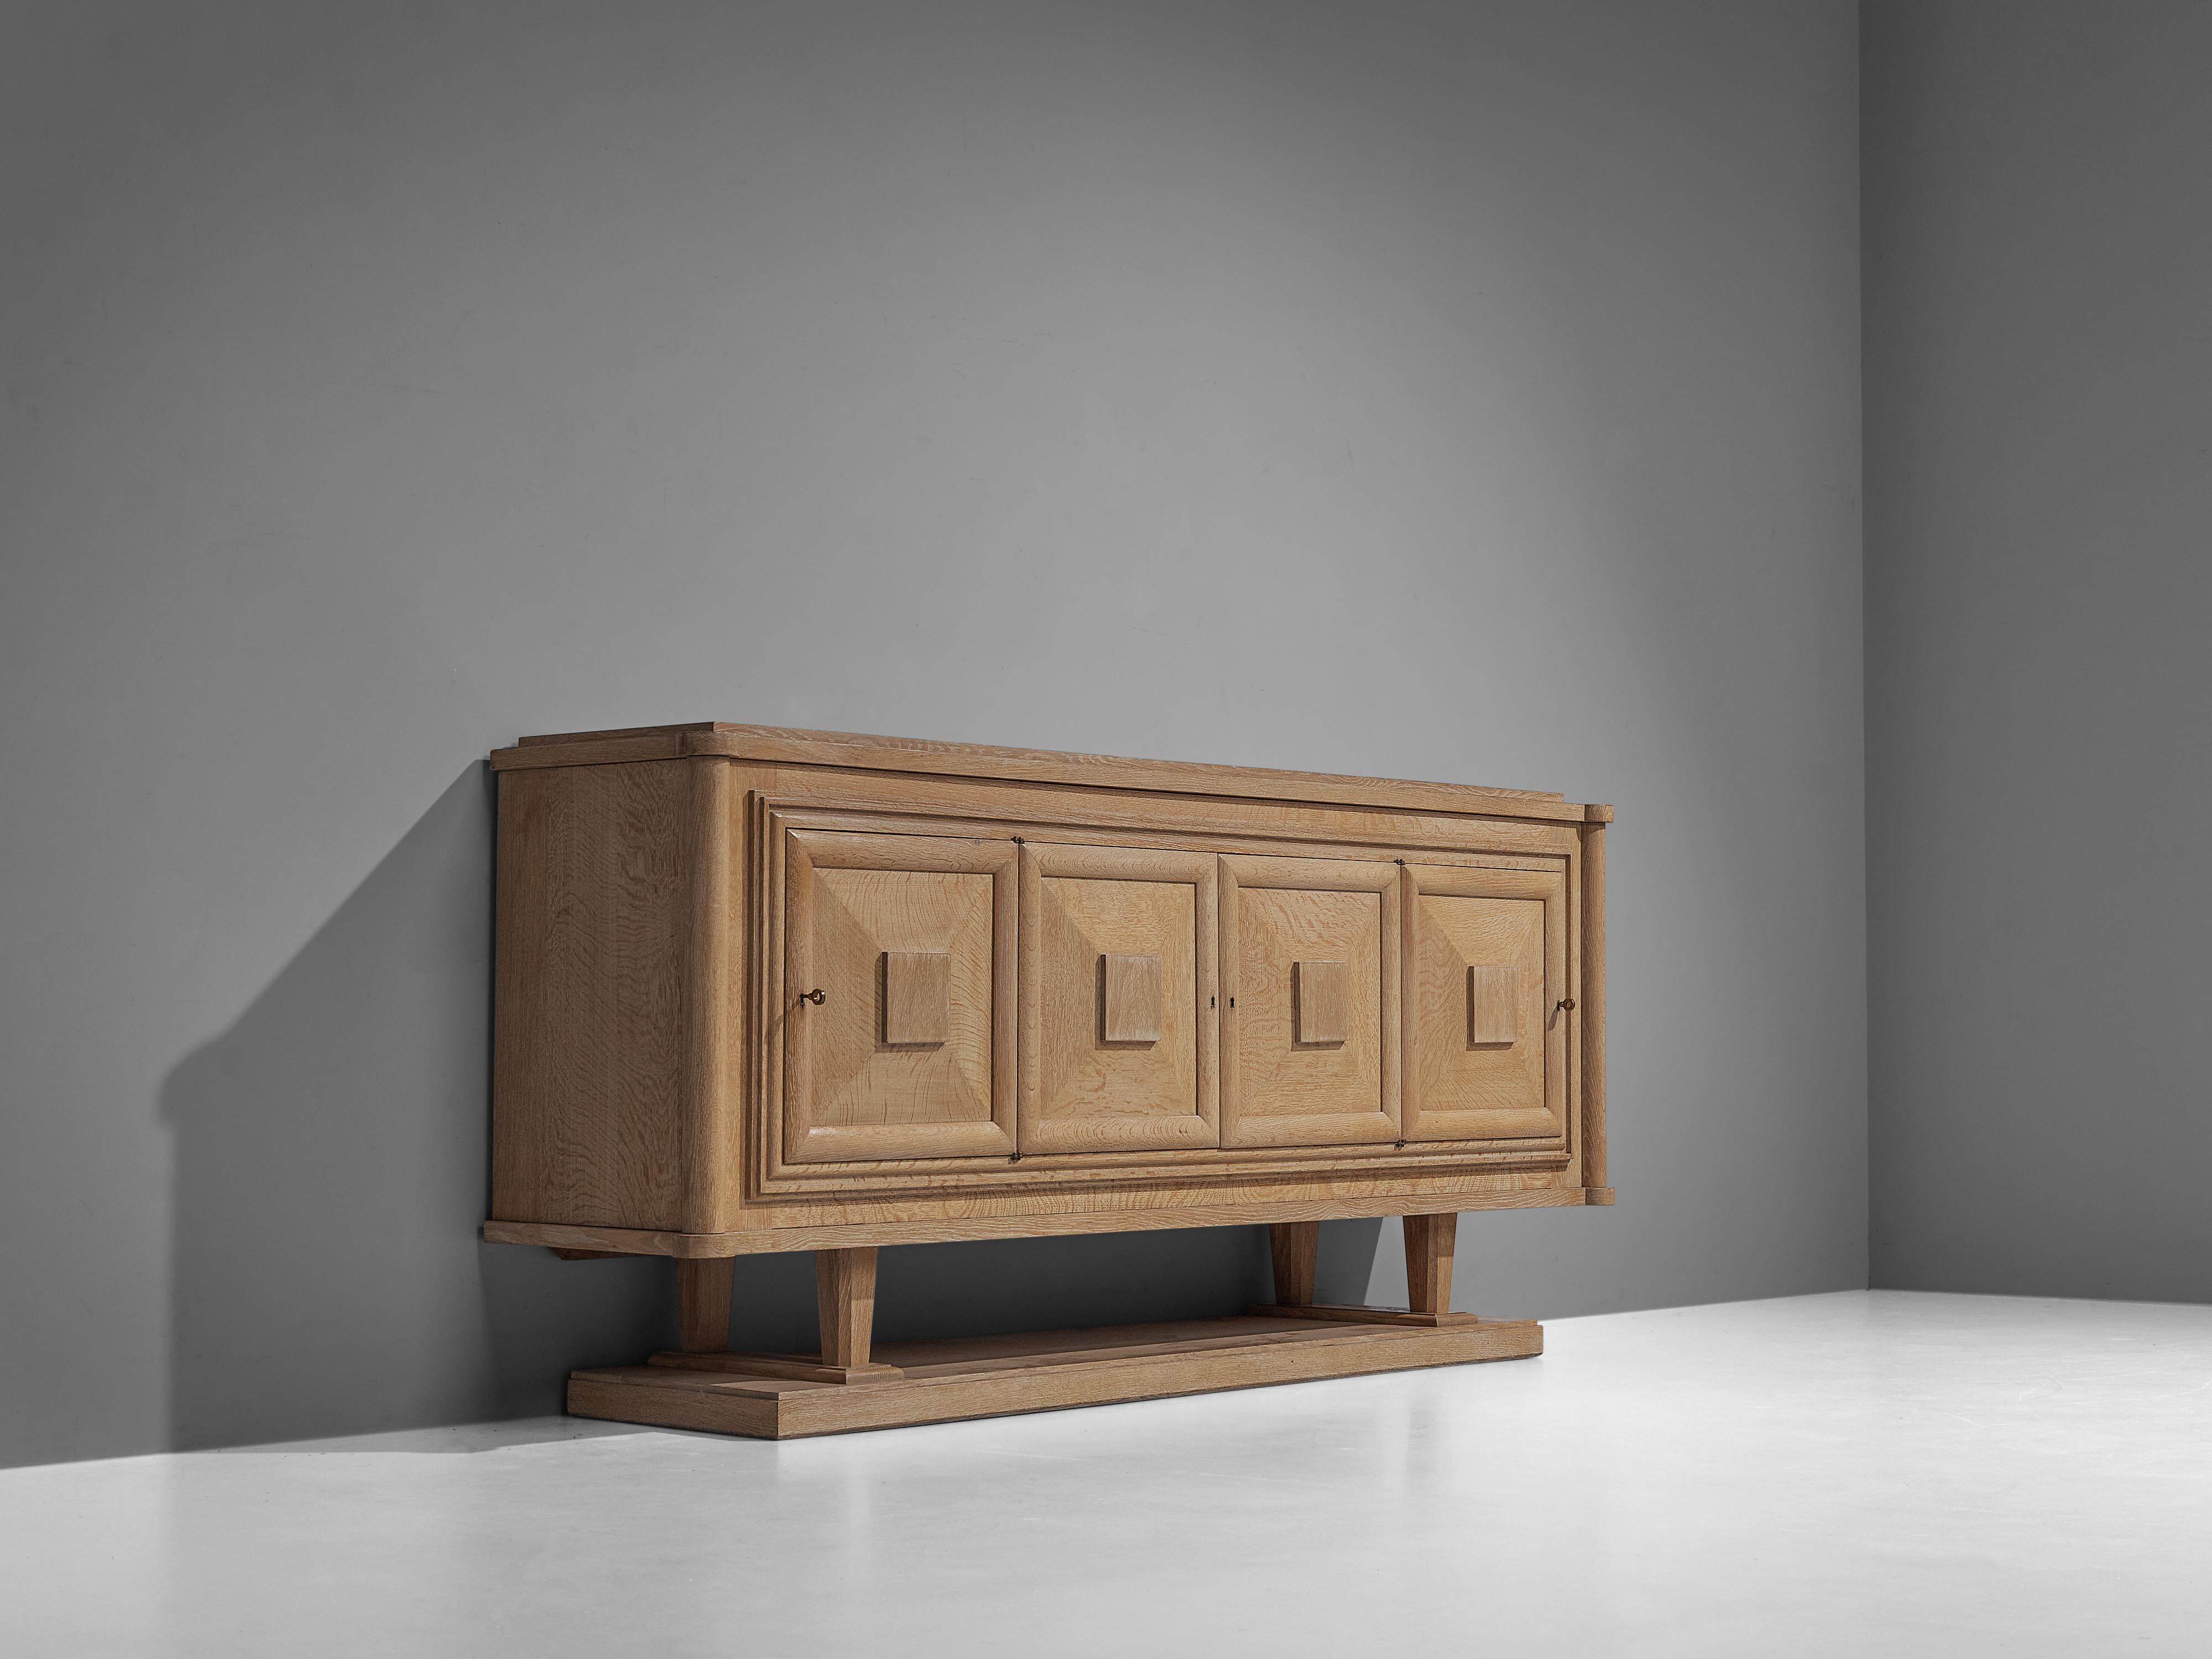 Sideboard, oak, France 1930s. 

Large credenza in oak. The sideboard has four doors, all with beautifully designed wooden graphical patterns. The diagonal lines with added squares and a frame emphasize the three-dimensional character of the front.